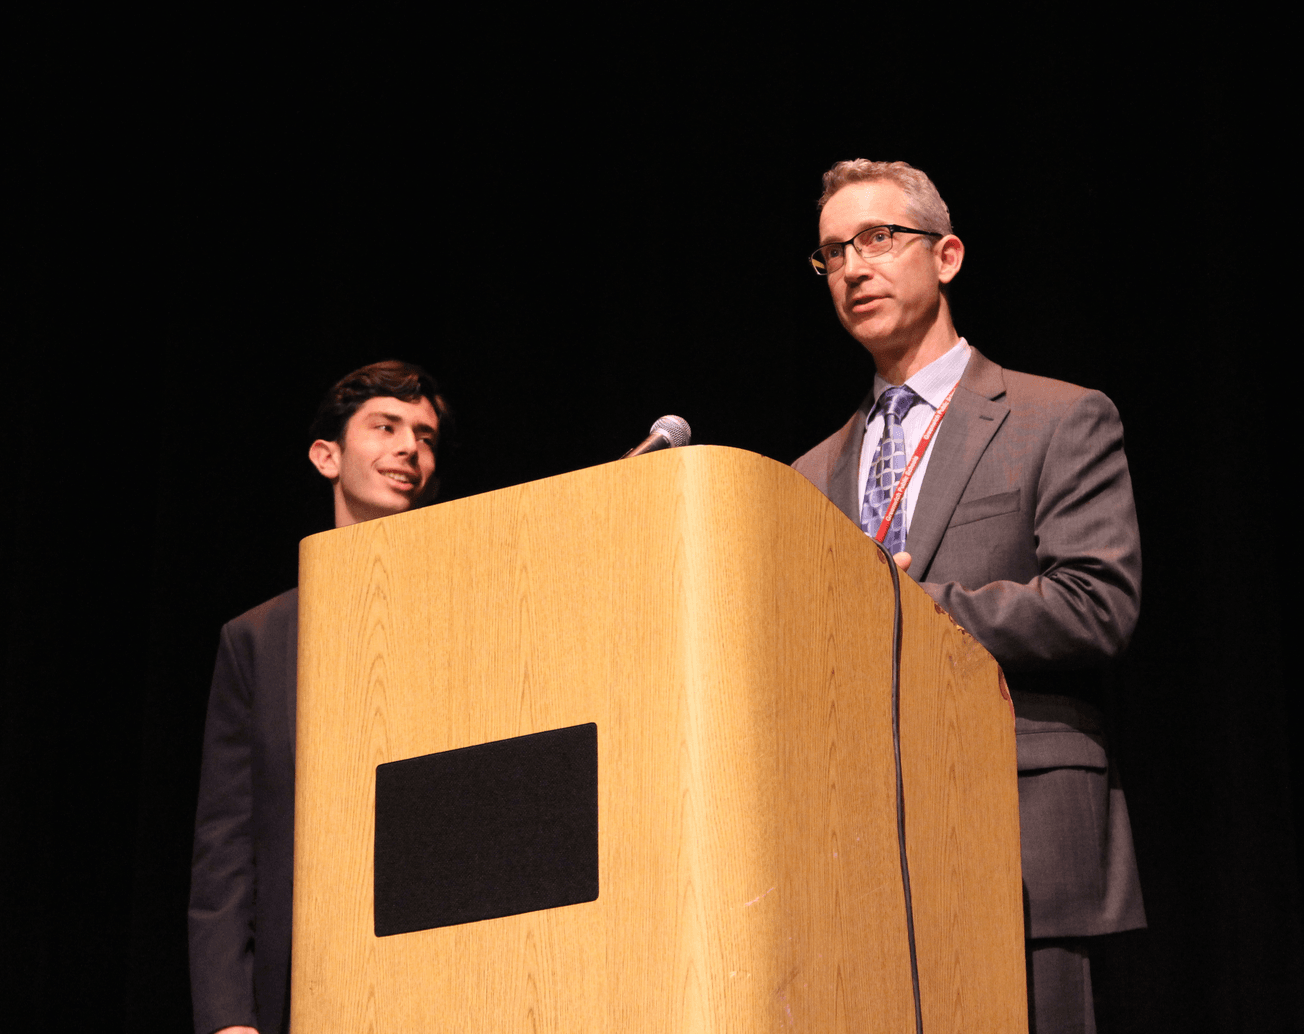 Greg Goldstein was presented the Cantor House award from Jason Goldstein. March 13, 2018 Photo: Leslie Yager